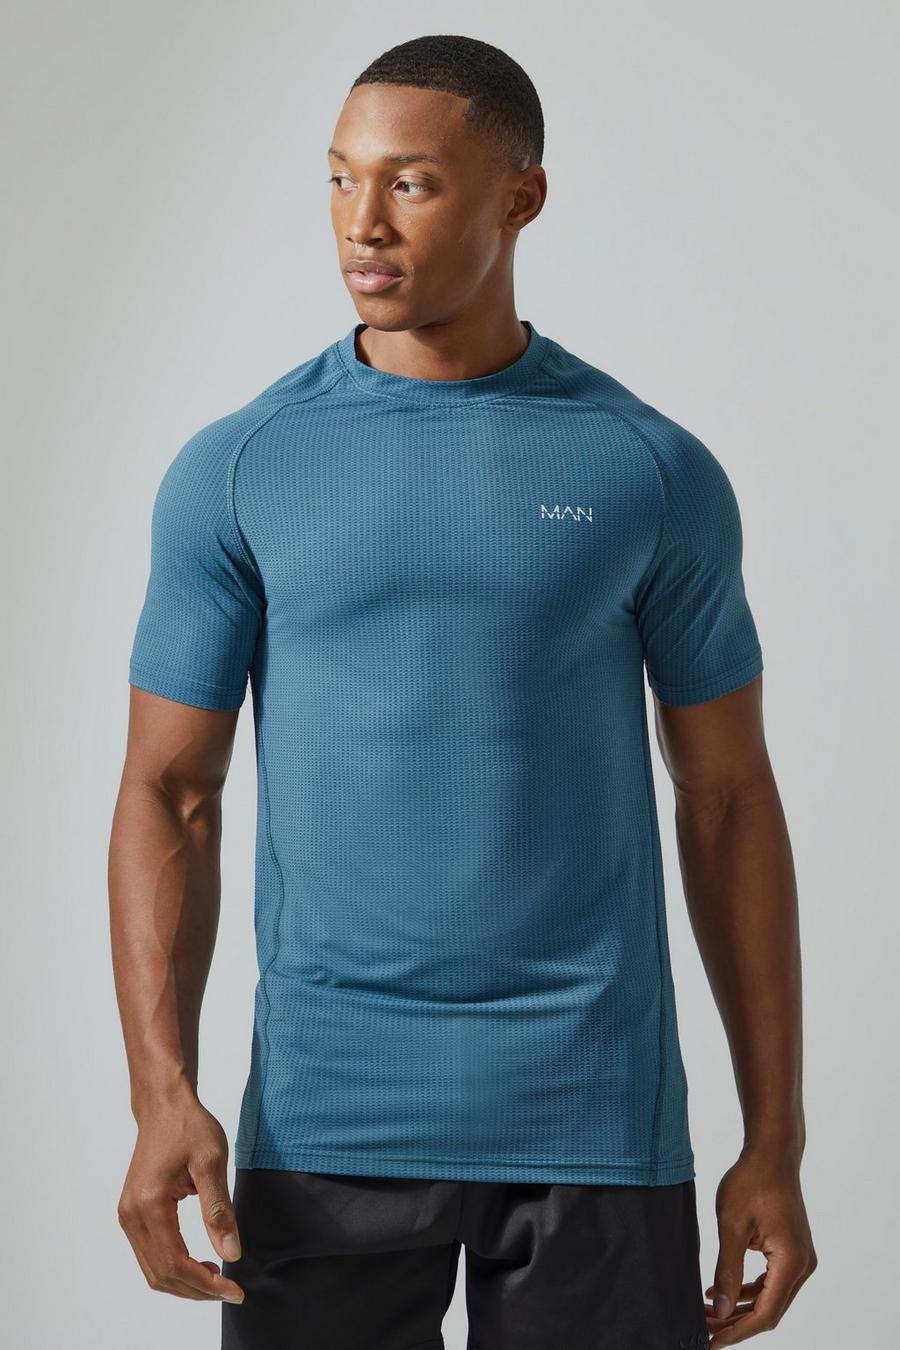 Man Active Muscle-Fit T-Shirt, Teal image number 1